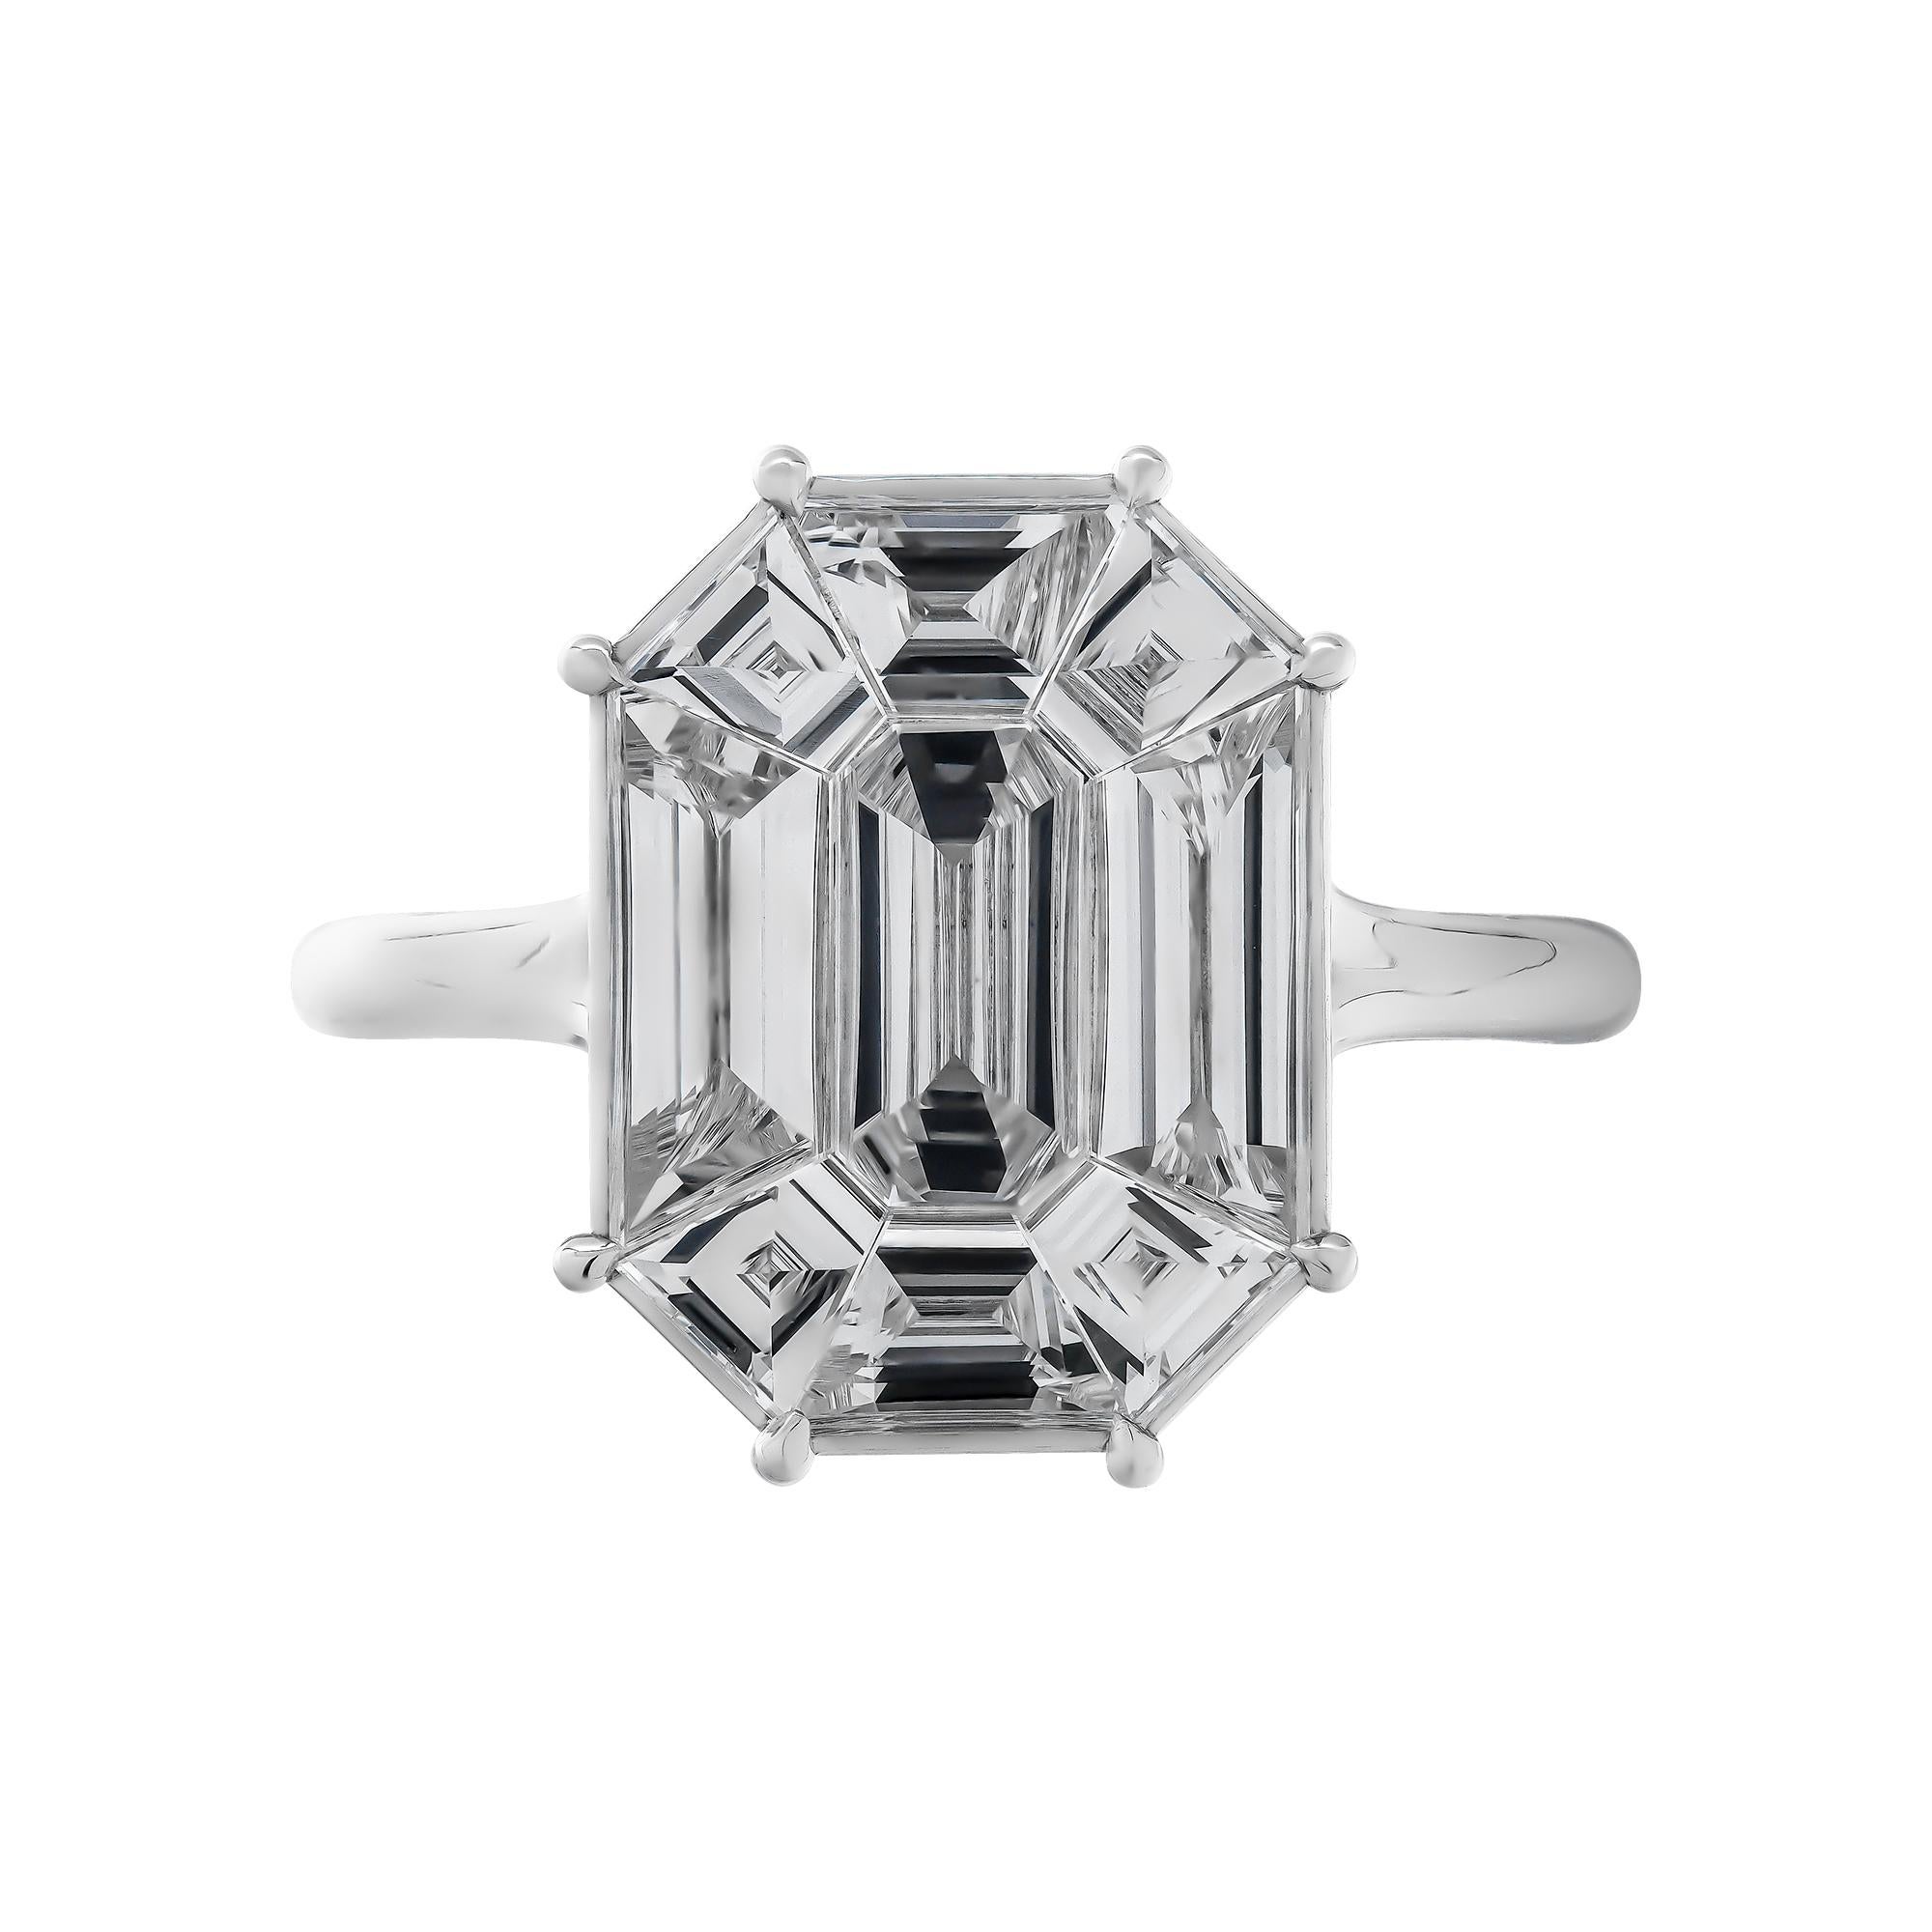 An Absolute stunner !
Beautiful, edgy yet timeless piece - Emerald cut ring set with Pie Cut diamond totaling 2.20ct delivering the look of 5-6 carat for a fraction of the price! All diamonds are natural G-H color VS clarity , 9 perfectly cut